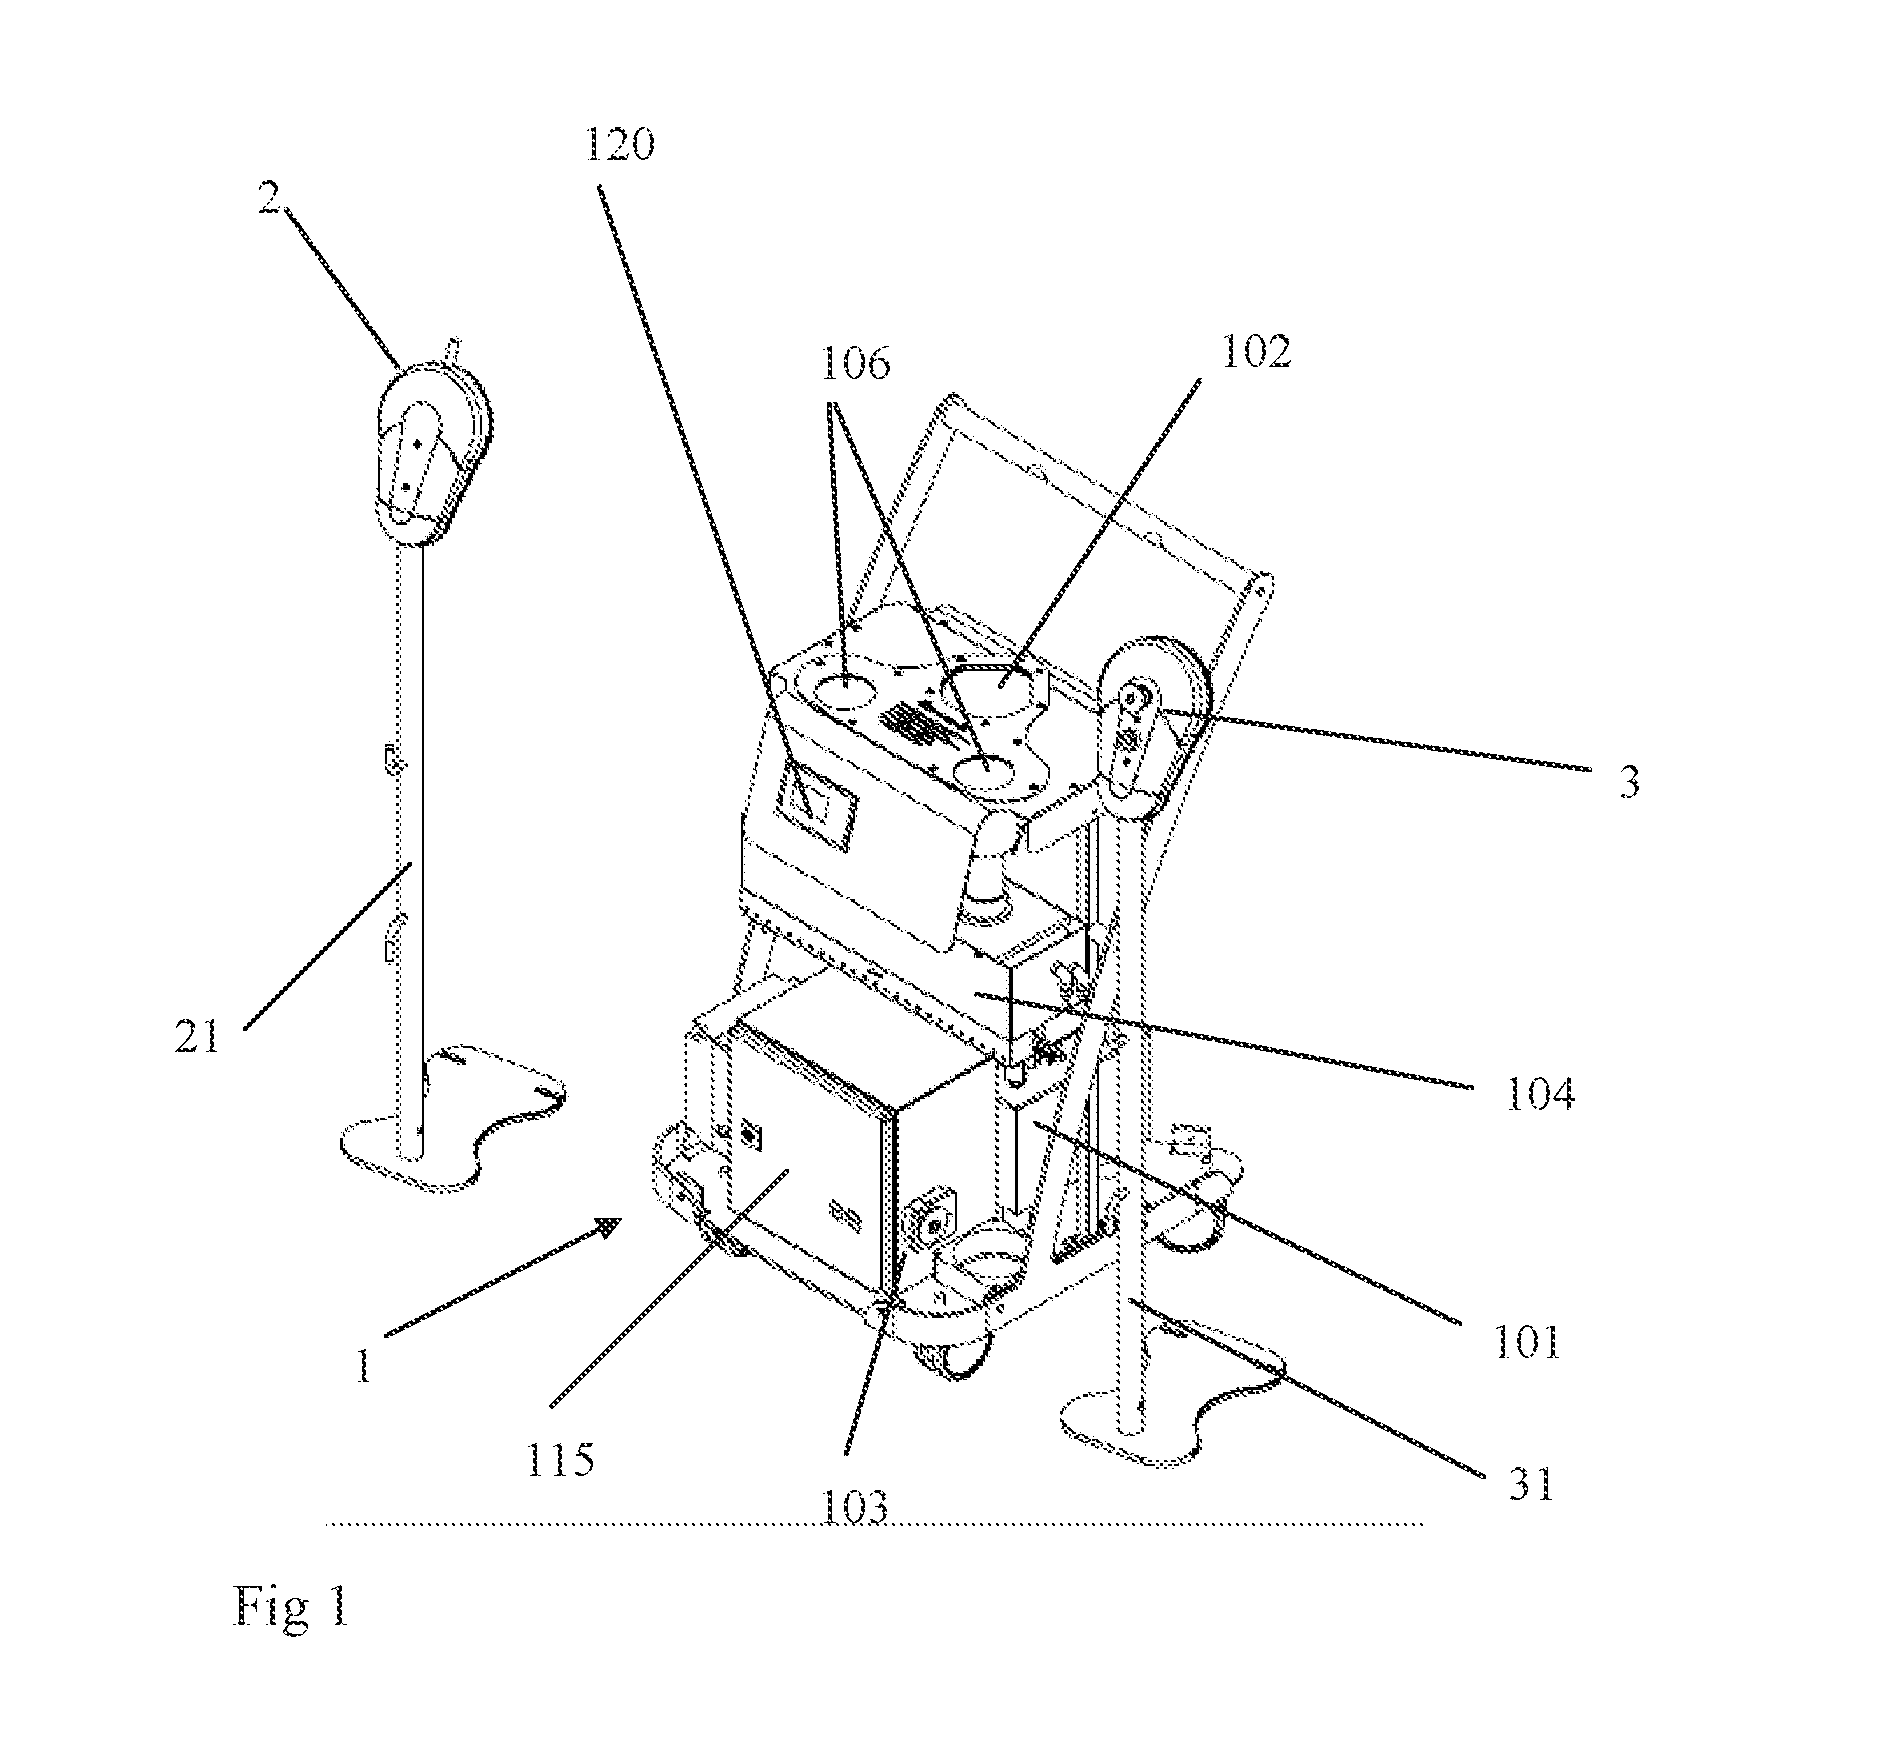 Method and apparatus for disinfection